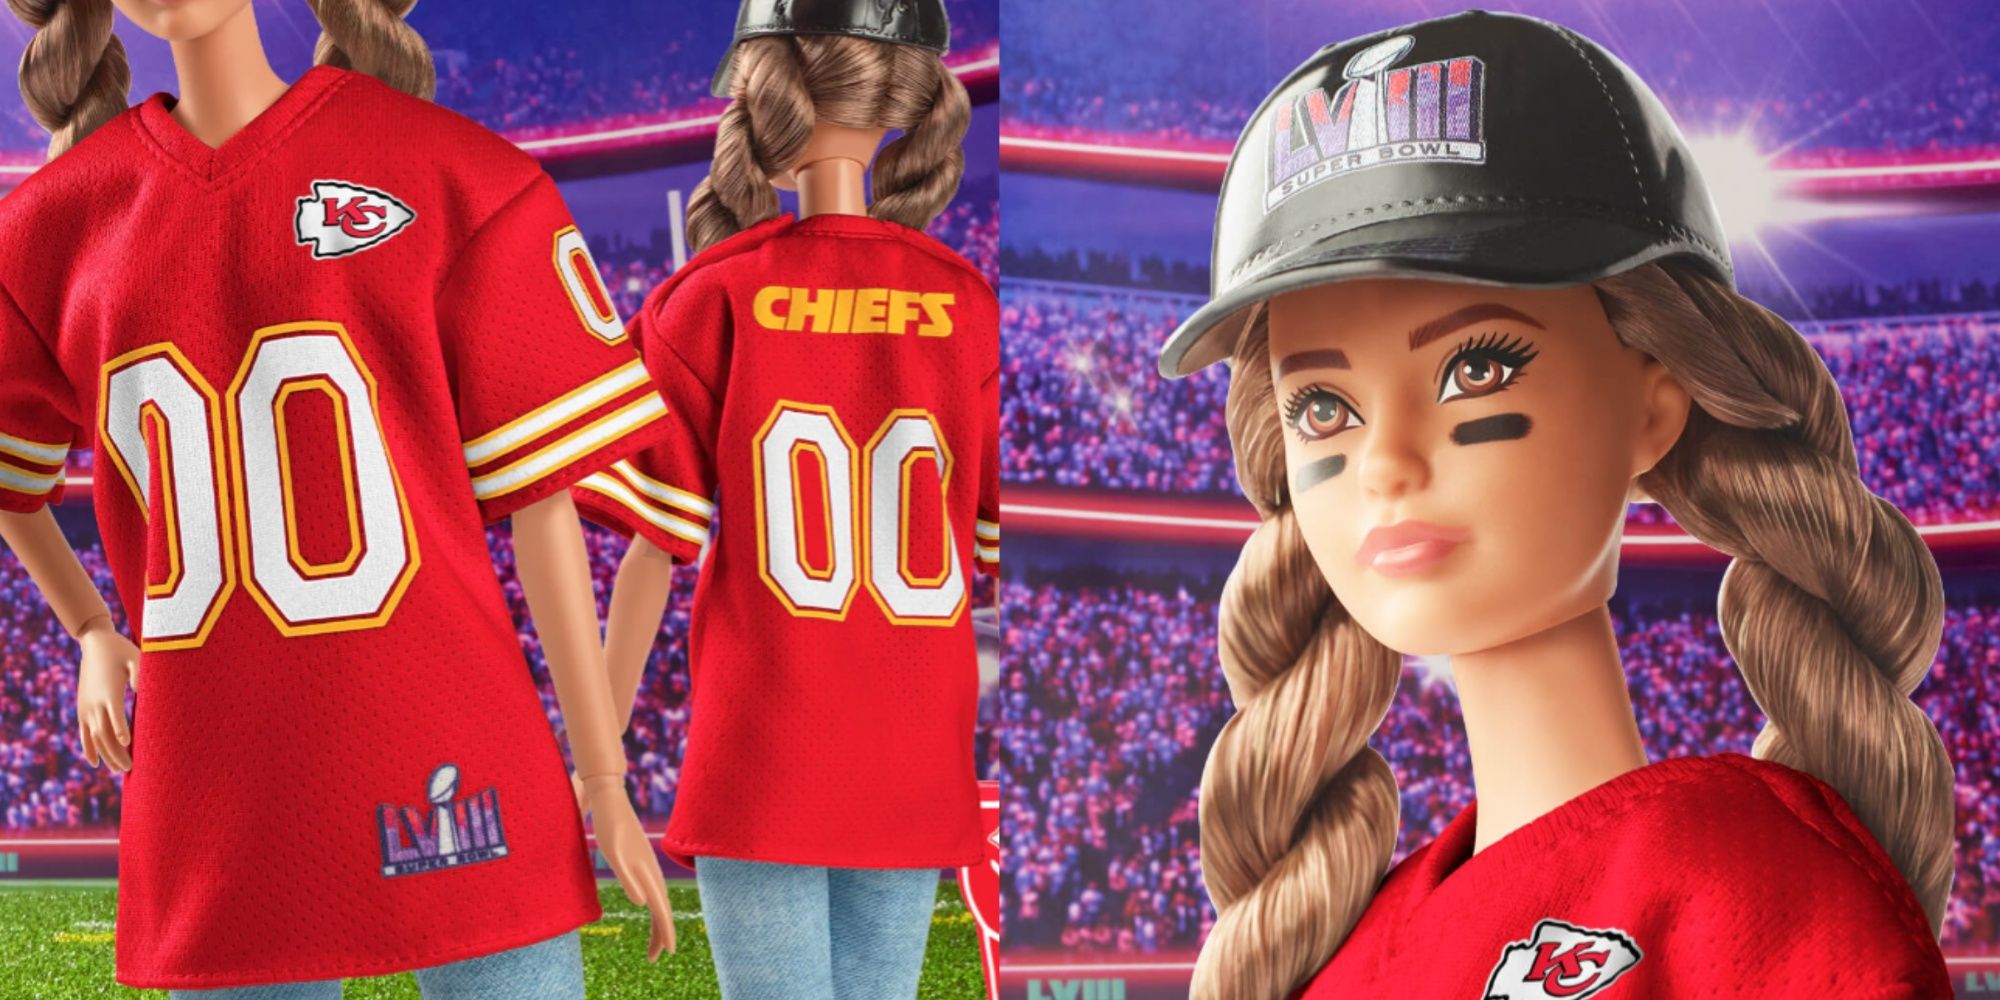 kansas city chiefs barbie shirt front and back, and head with cap